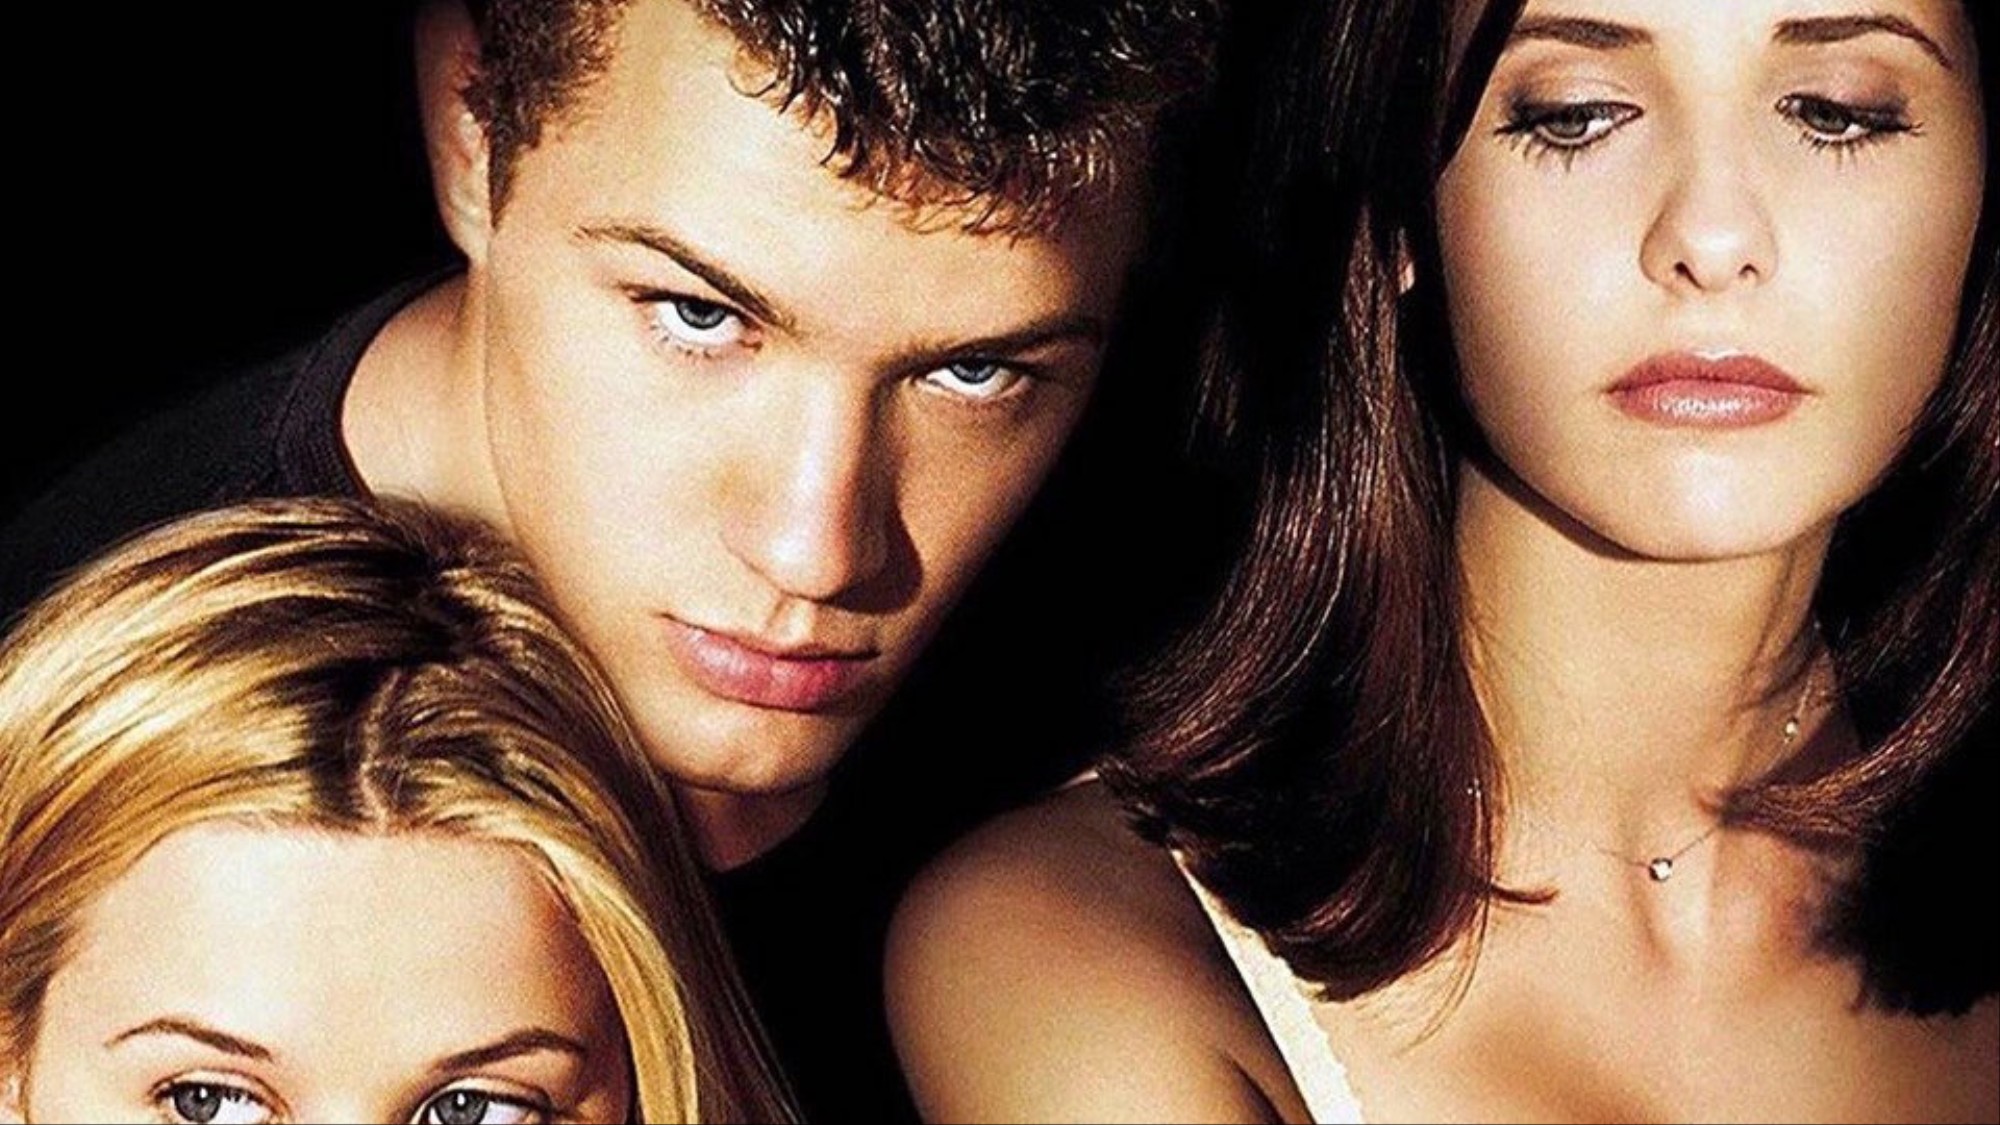 Blackmailed Incest Porn - The 'Cruel Intentions' Soundtrack Captured the Dark Heart of ...